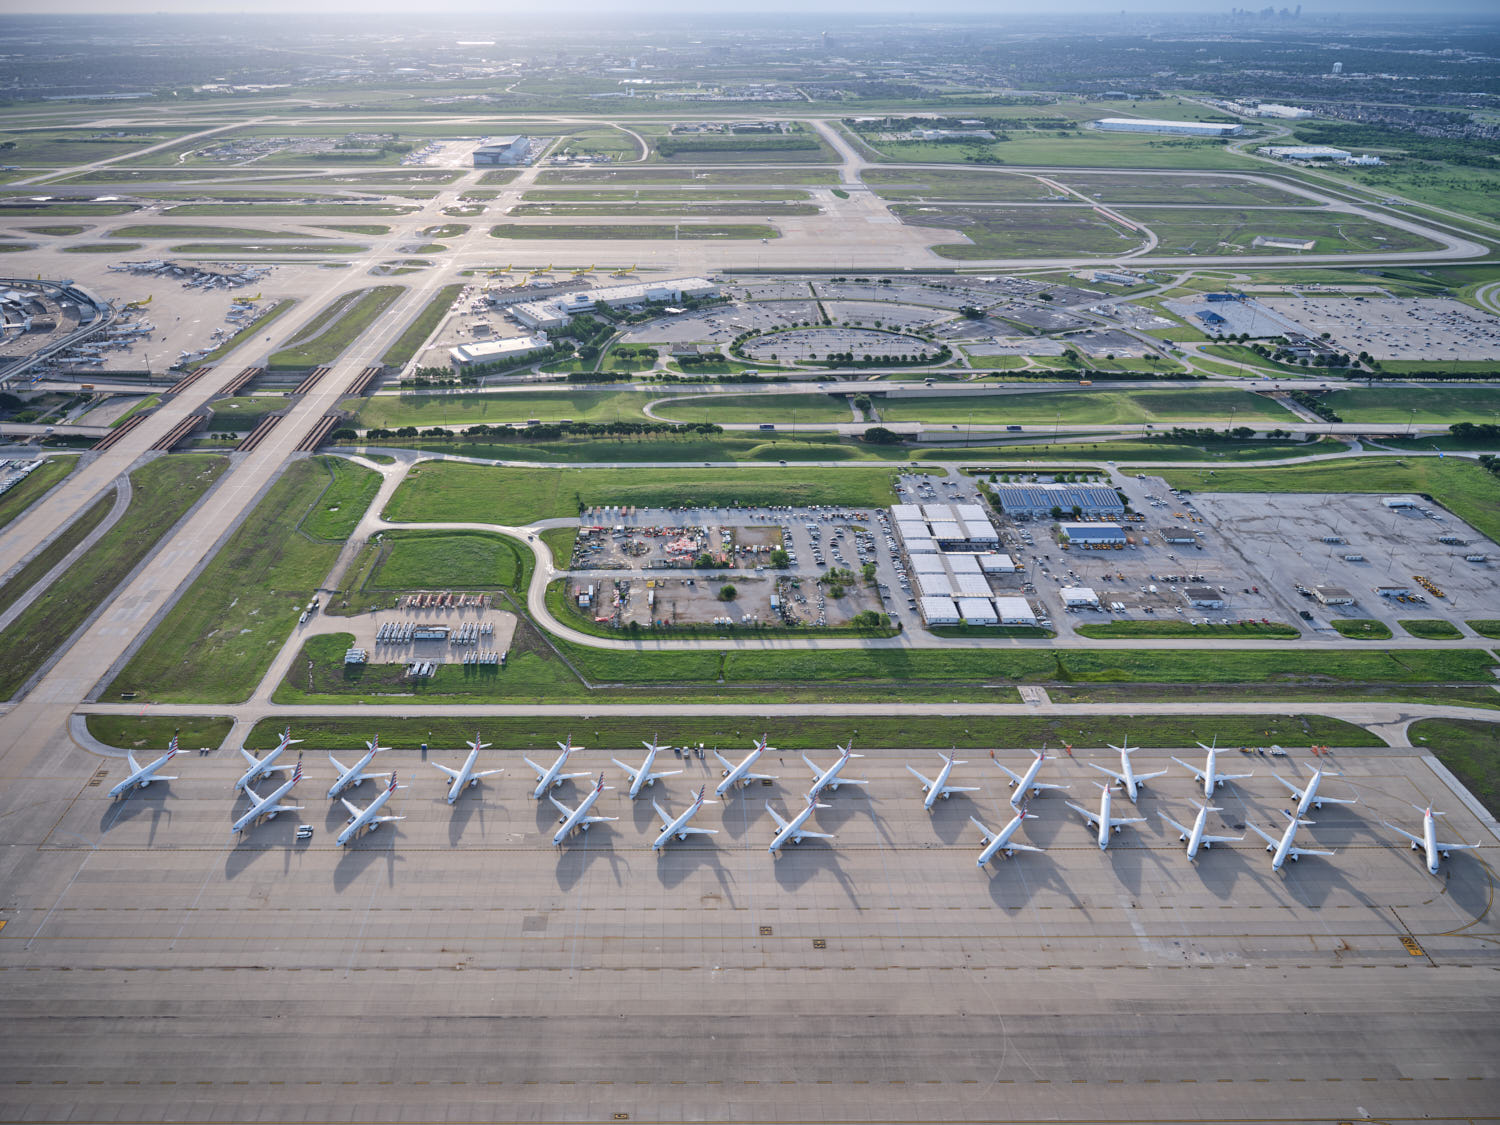 an aerial view of a runway with airplanes parked on it